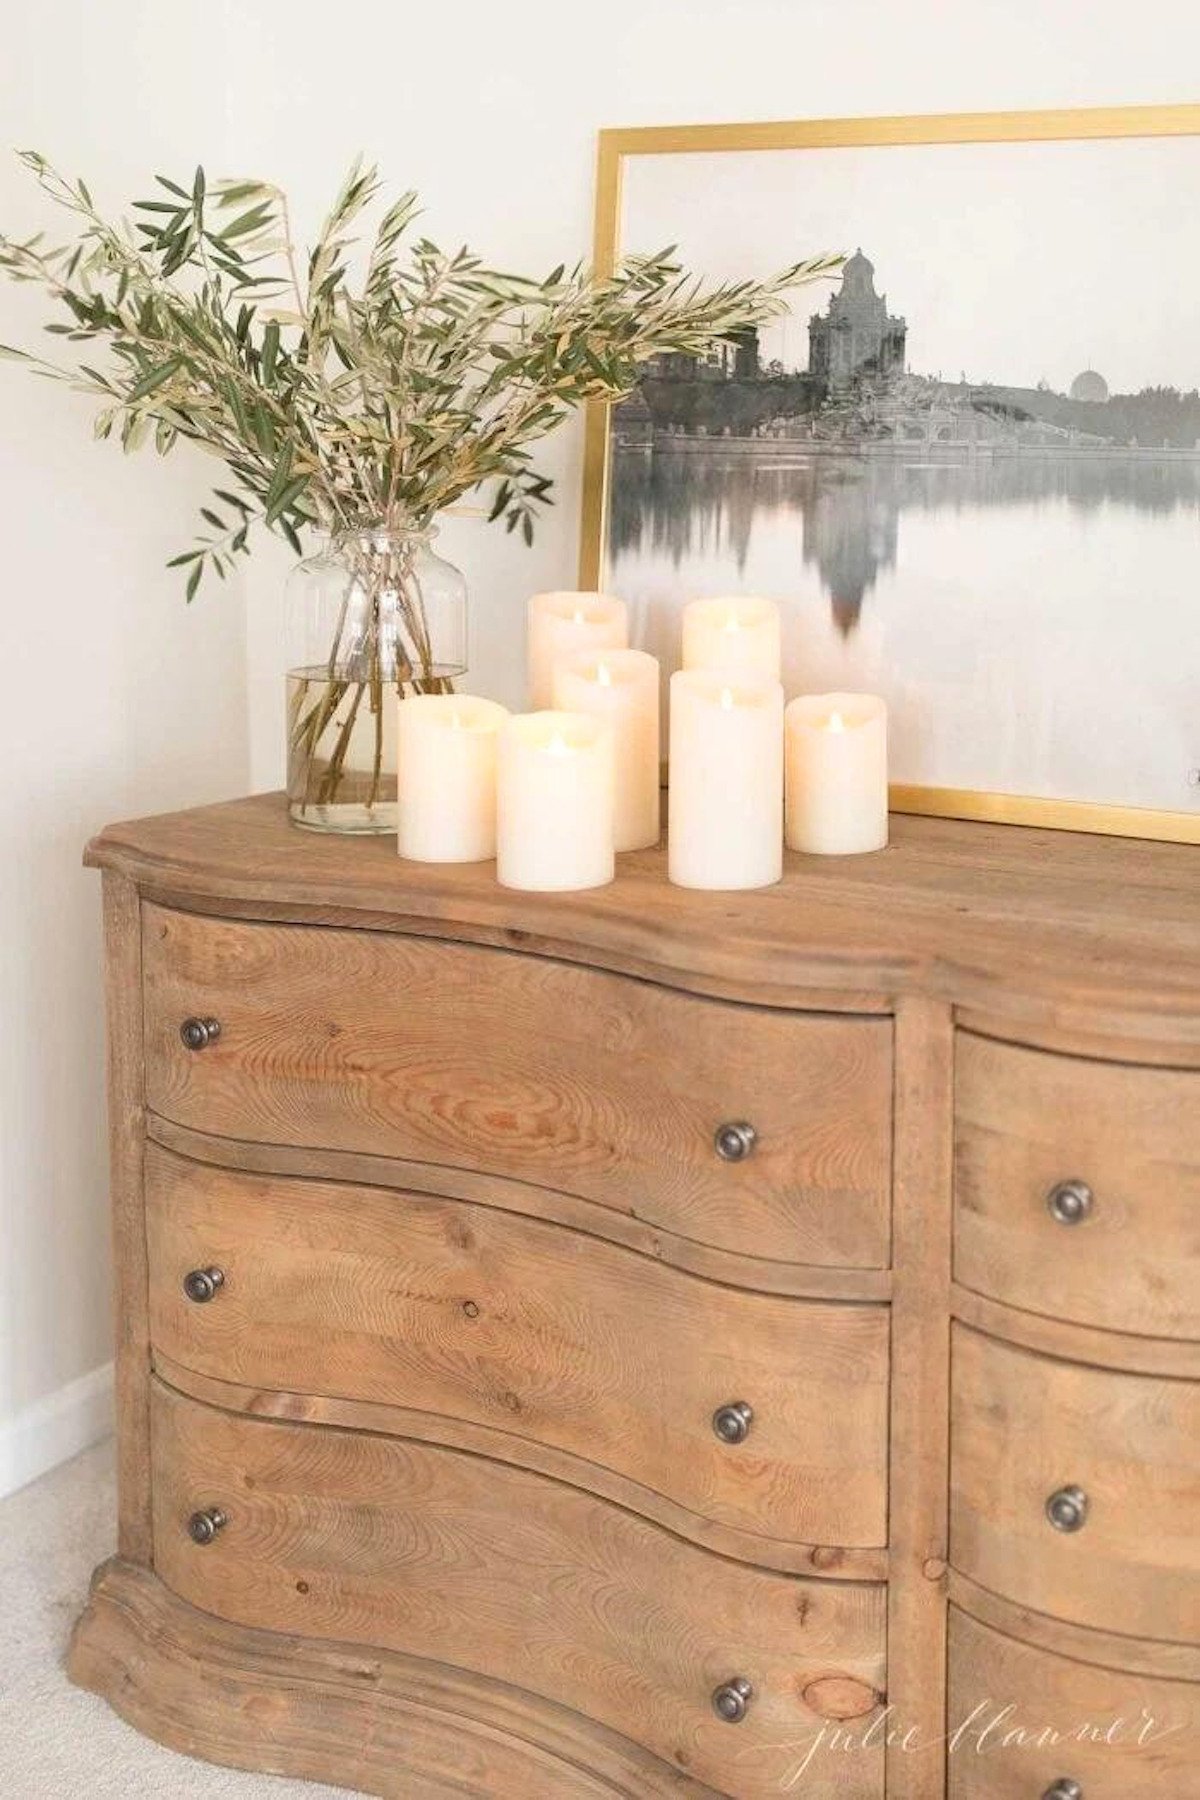 A wooden dresser with candles and Christmas lights.